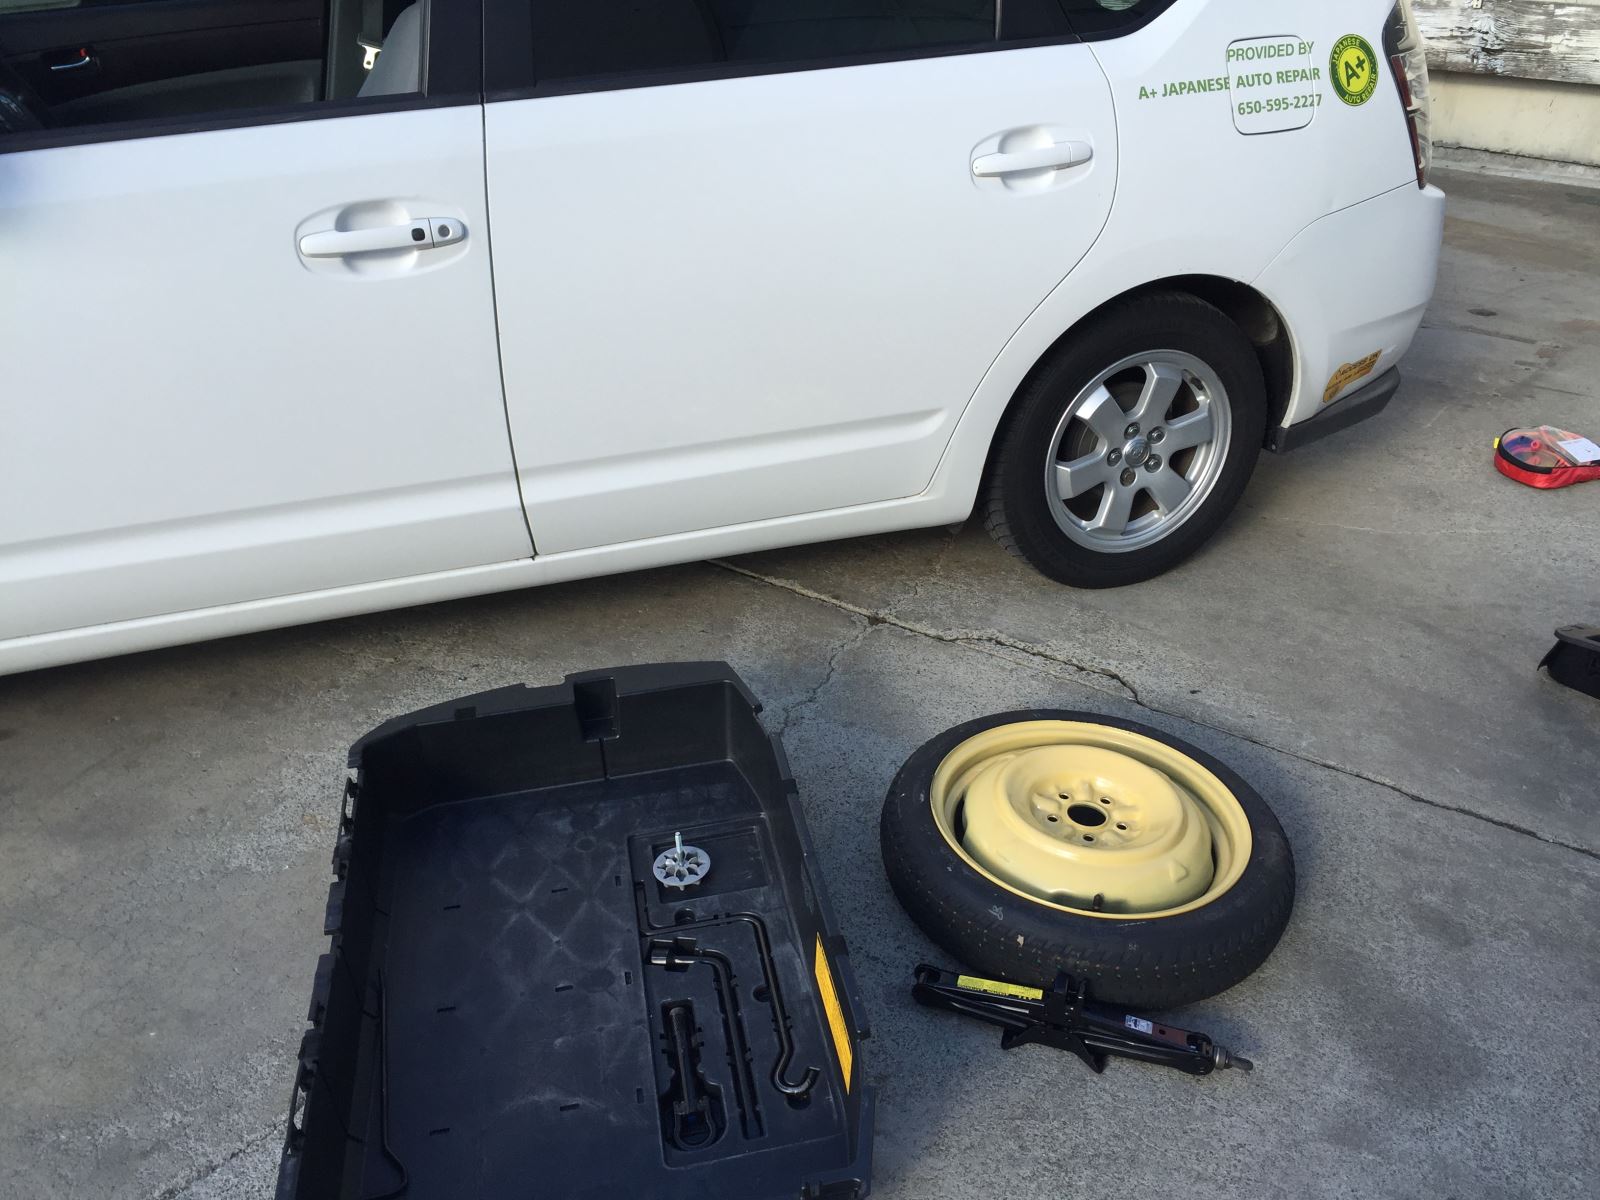 Spare tire and tools removed